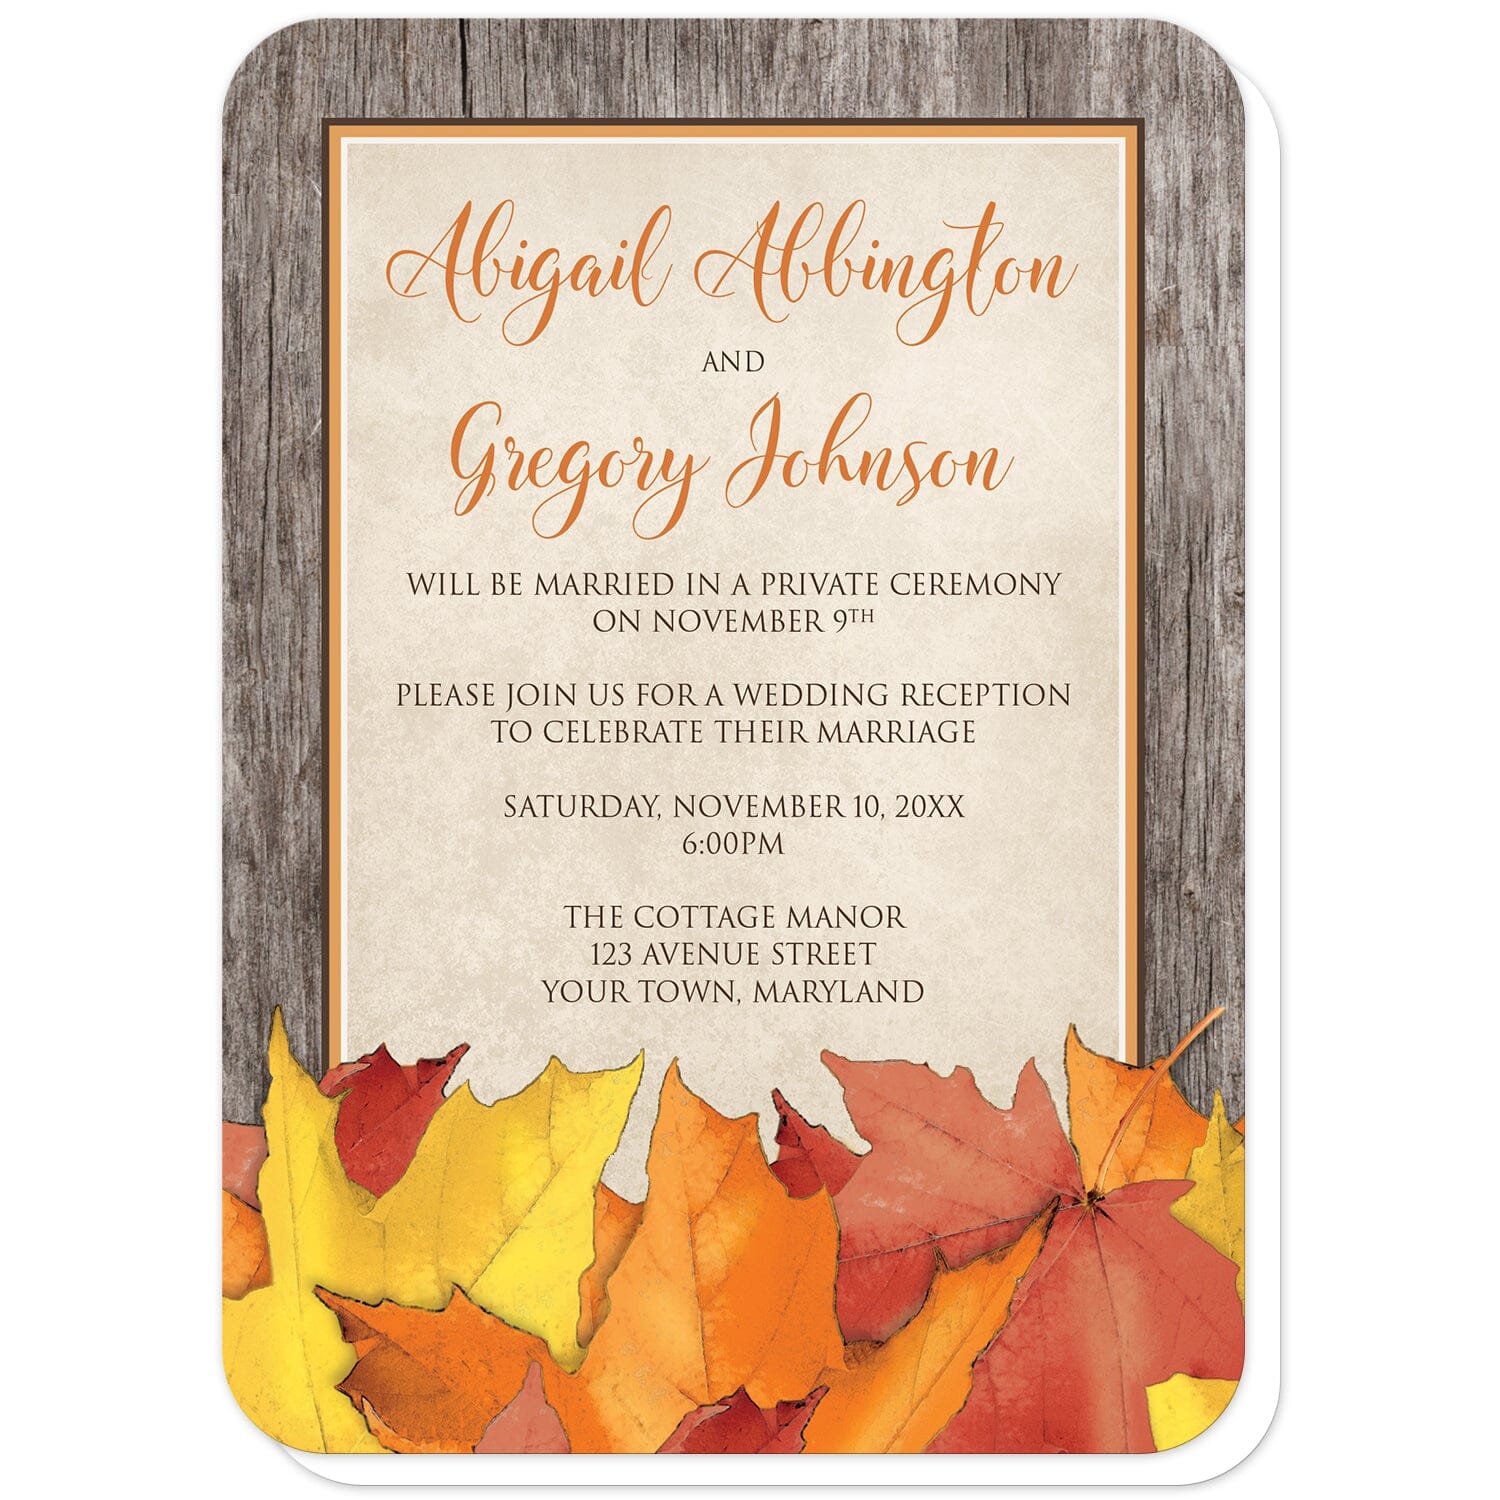 Rustic Wood and Leaves Fall Reception Only Invitations (with rounded corners) at Artistically Invited. Country-inspired rustic wood and leaves fall reception only invitations with an arrangement of rustic yellow, orange, and red autumn leaves along the bottom. Your personalized post-wedding reception details are custom printed in orange and brown over a beige parchment center frame area, outlined in orange and brown, with a brown wood border design. 